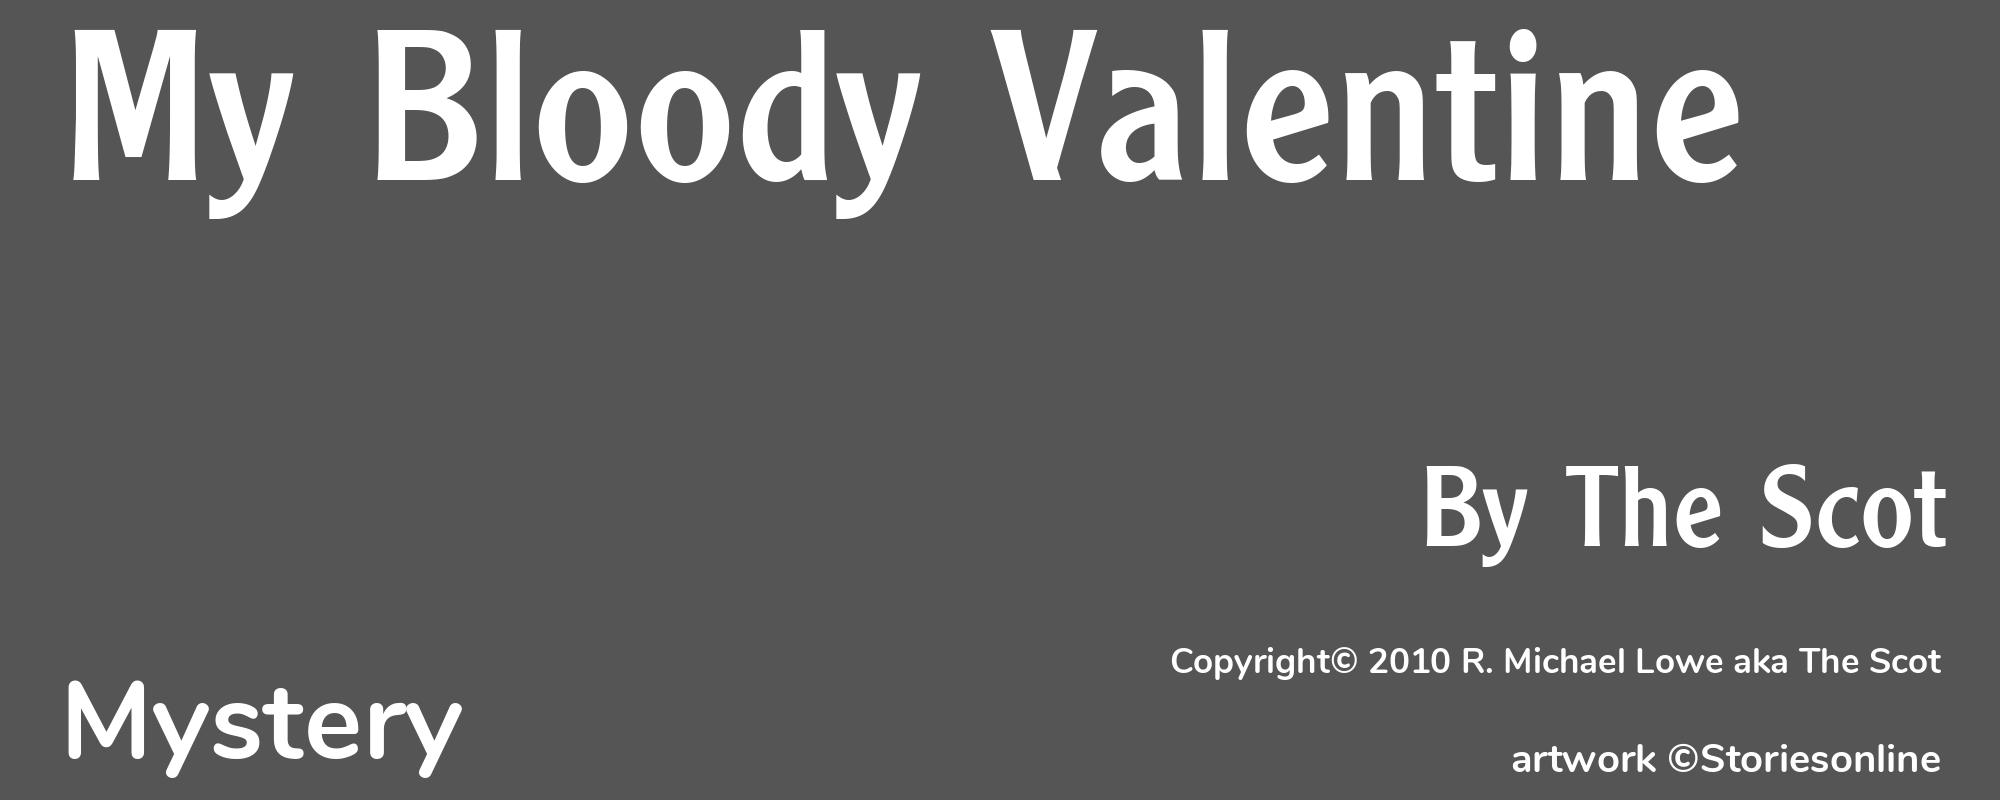 My Bloody Valentine - Cover